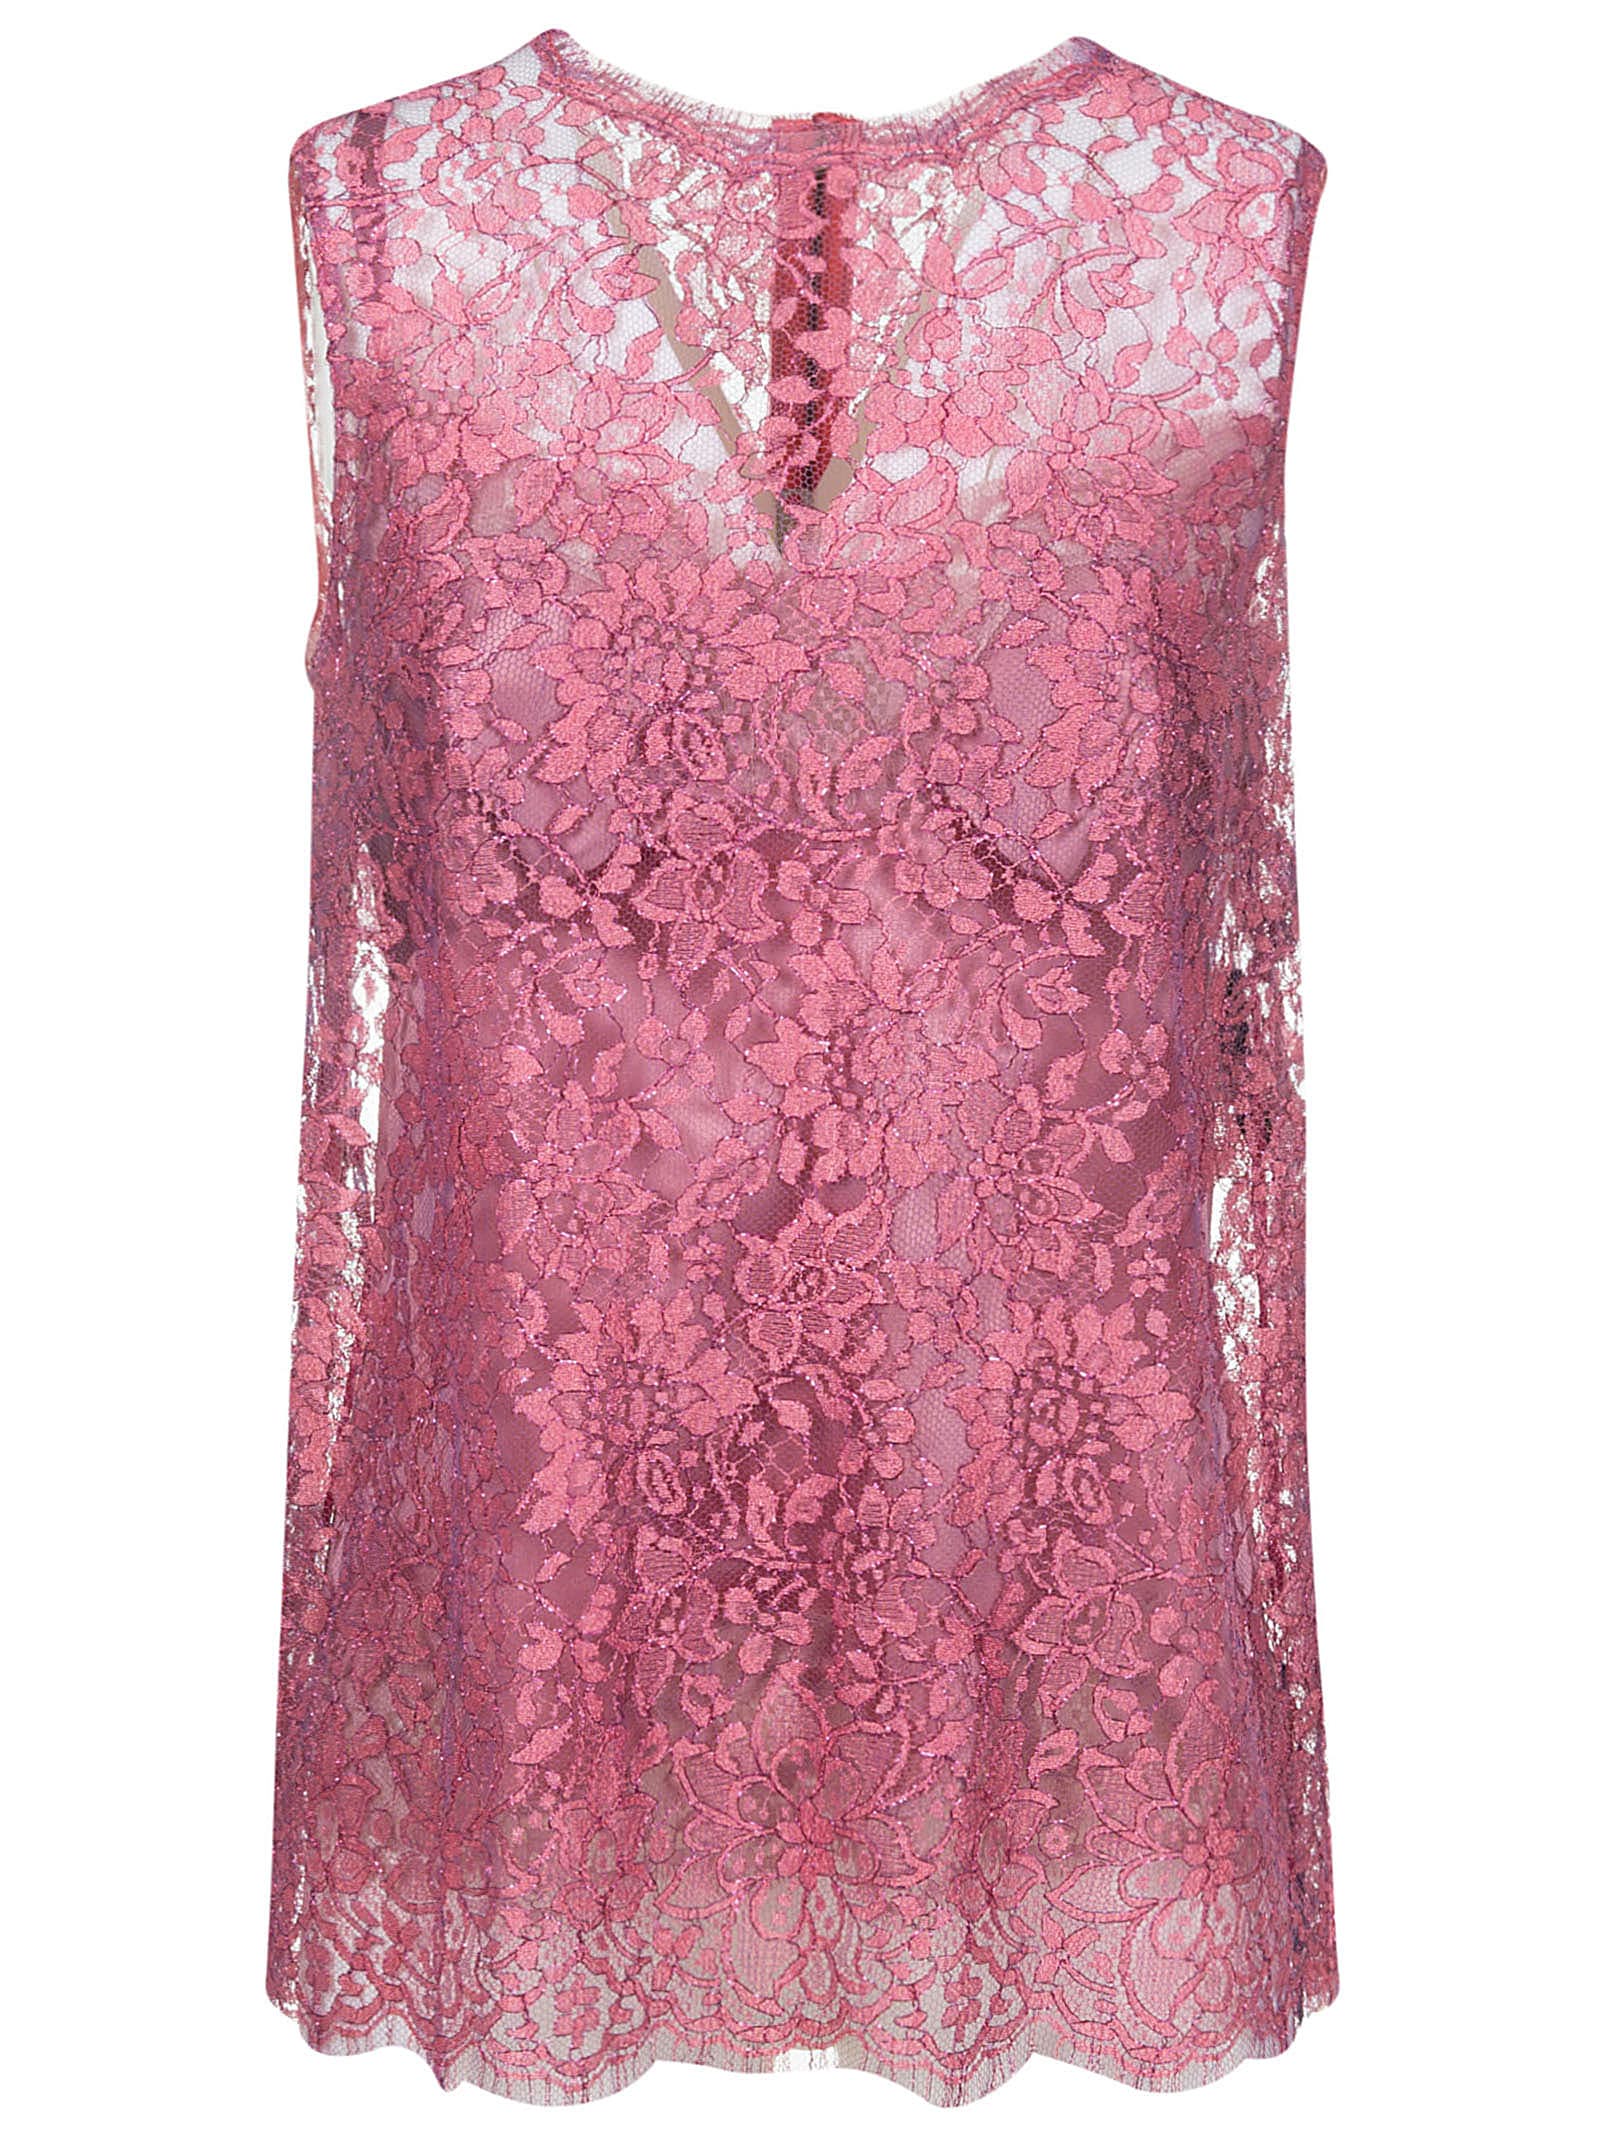 DOLCE & GABBANA FLORAL SLEEVELESS LACE TOP,11236290